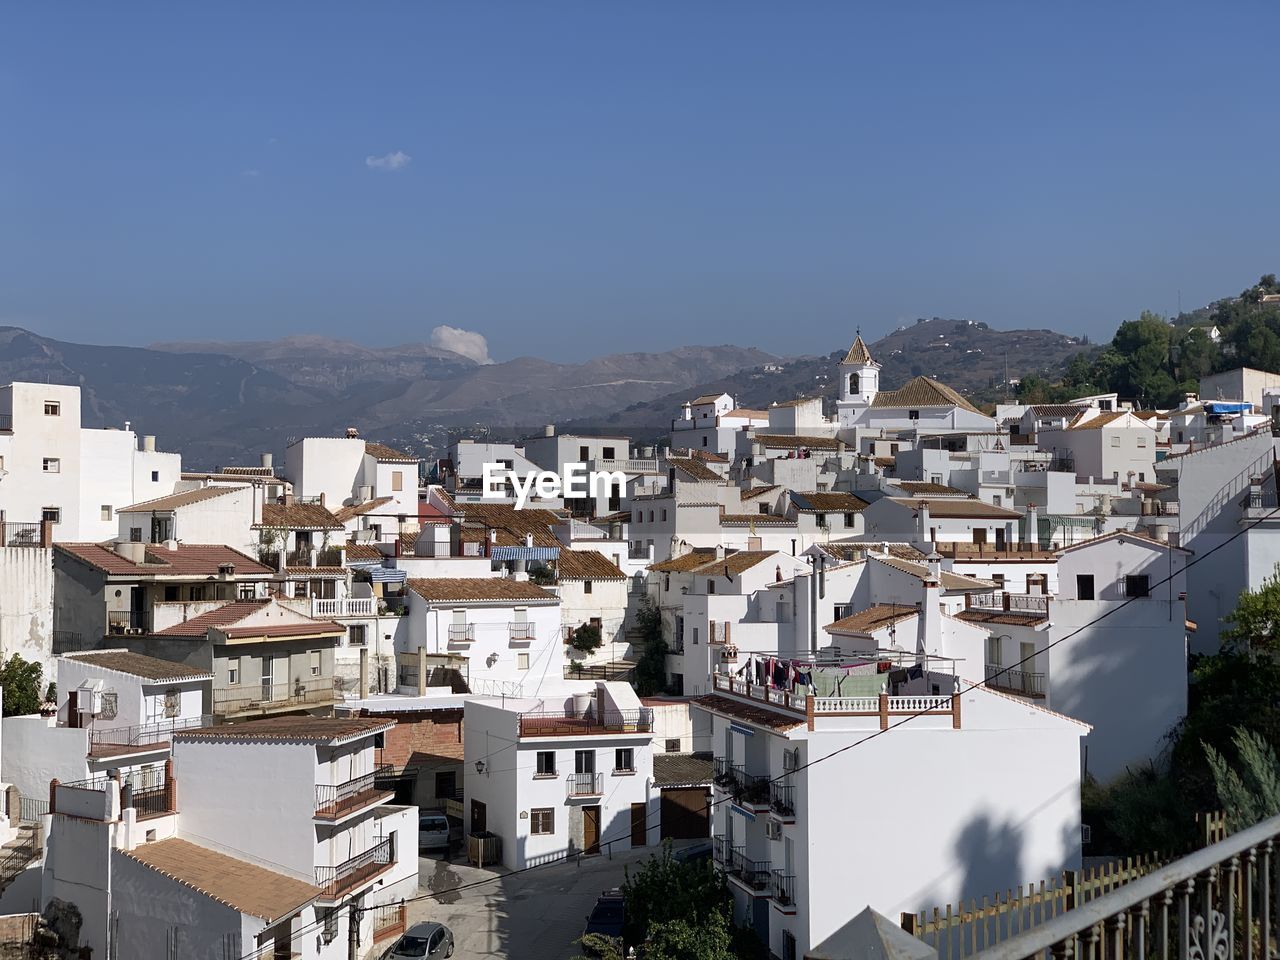 Rooftops of white village of sayalonga in the axarquía region of southern spain.